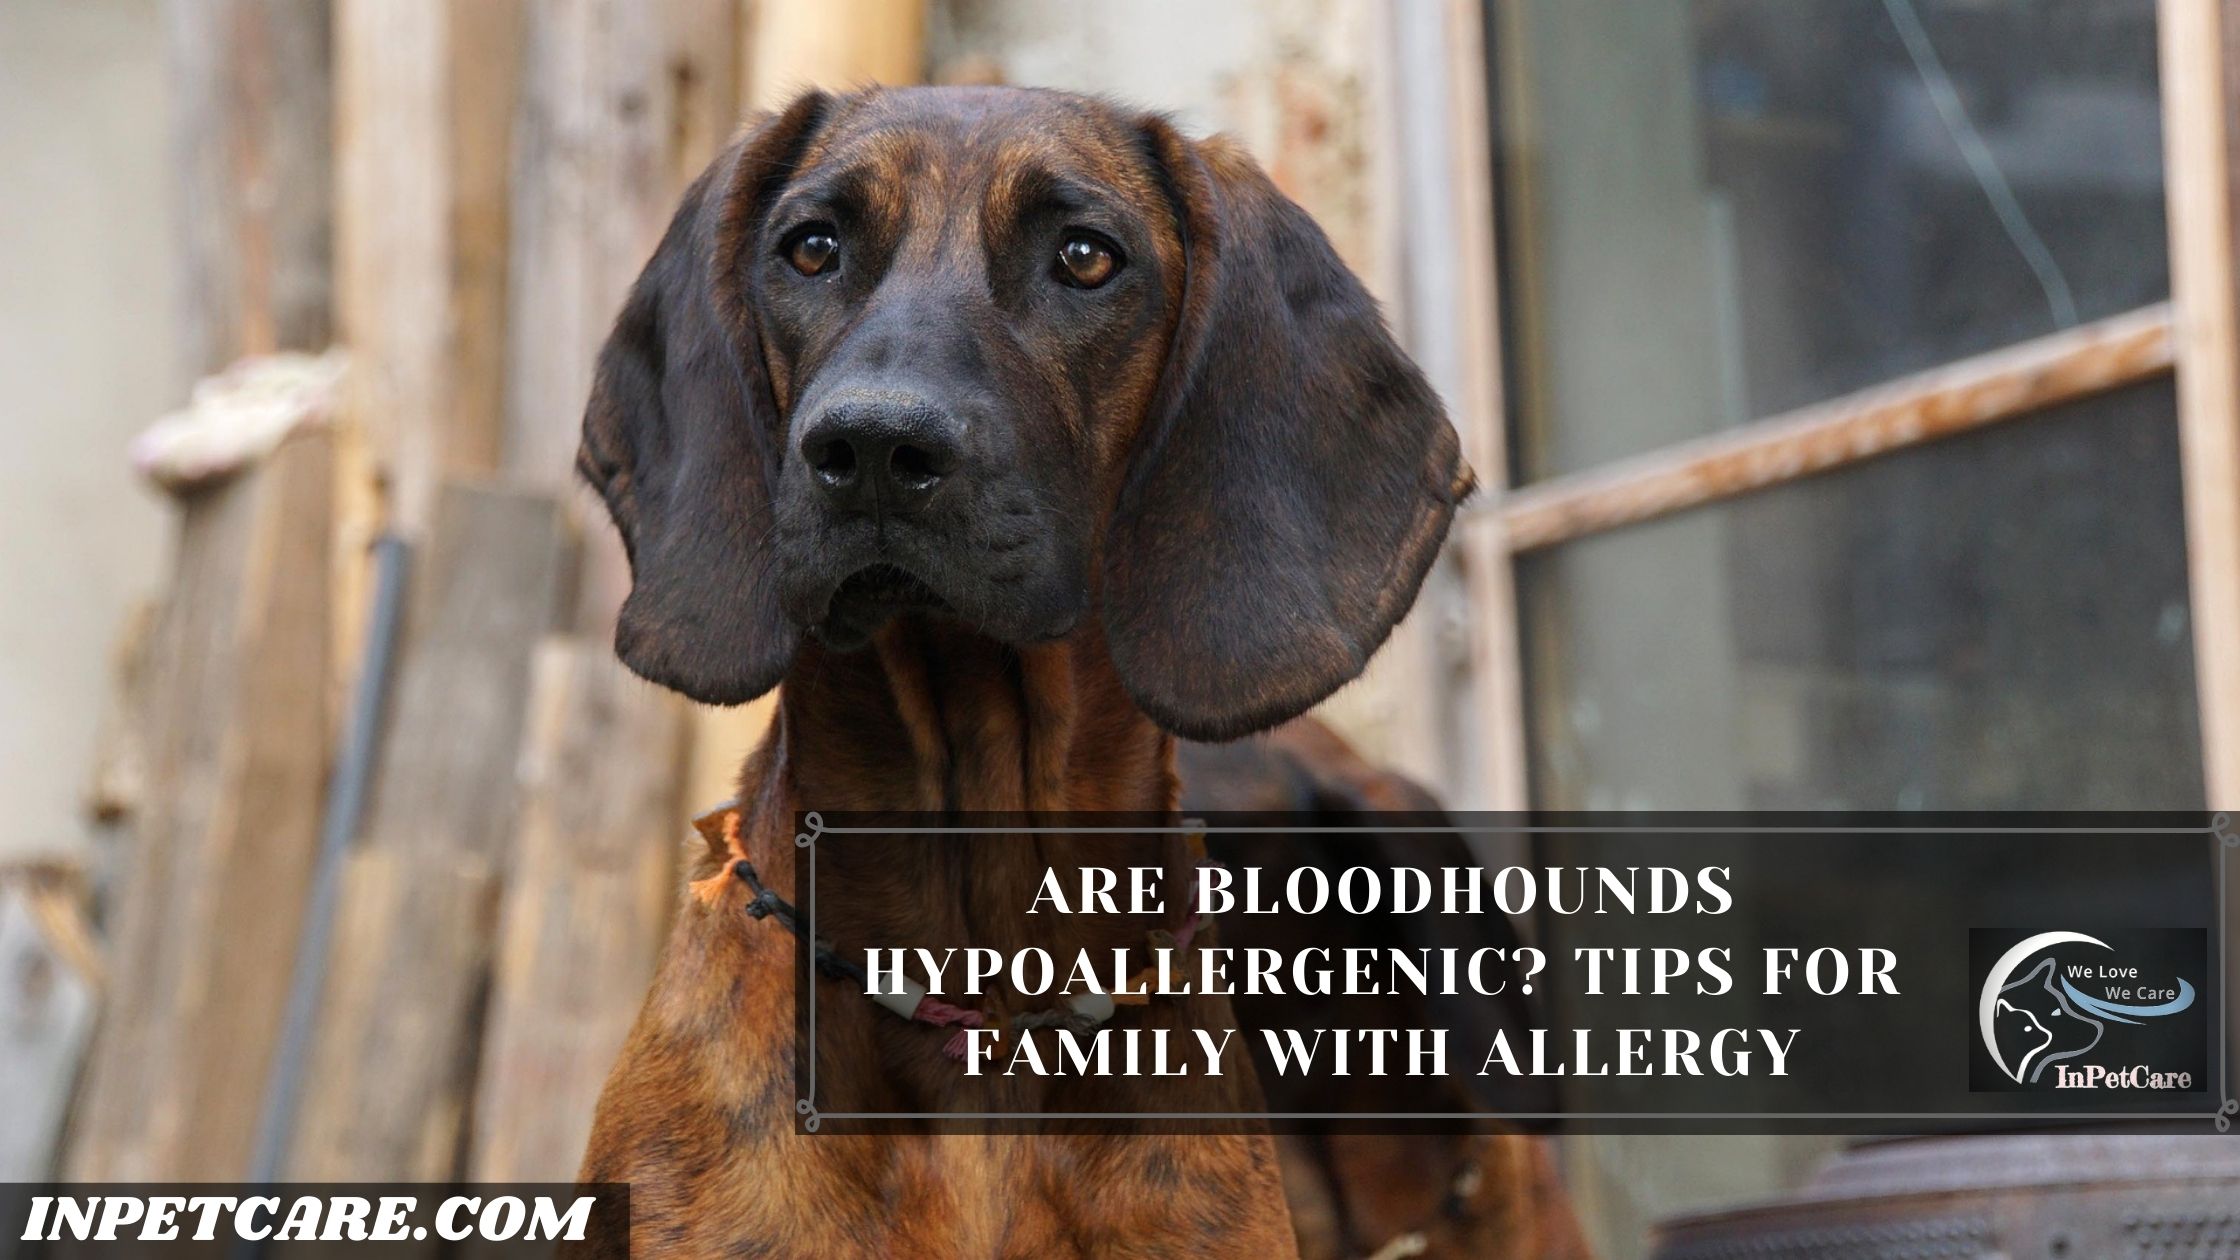 Are Bloodhounds Hypoallergenic? Tips For Family With Allergy